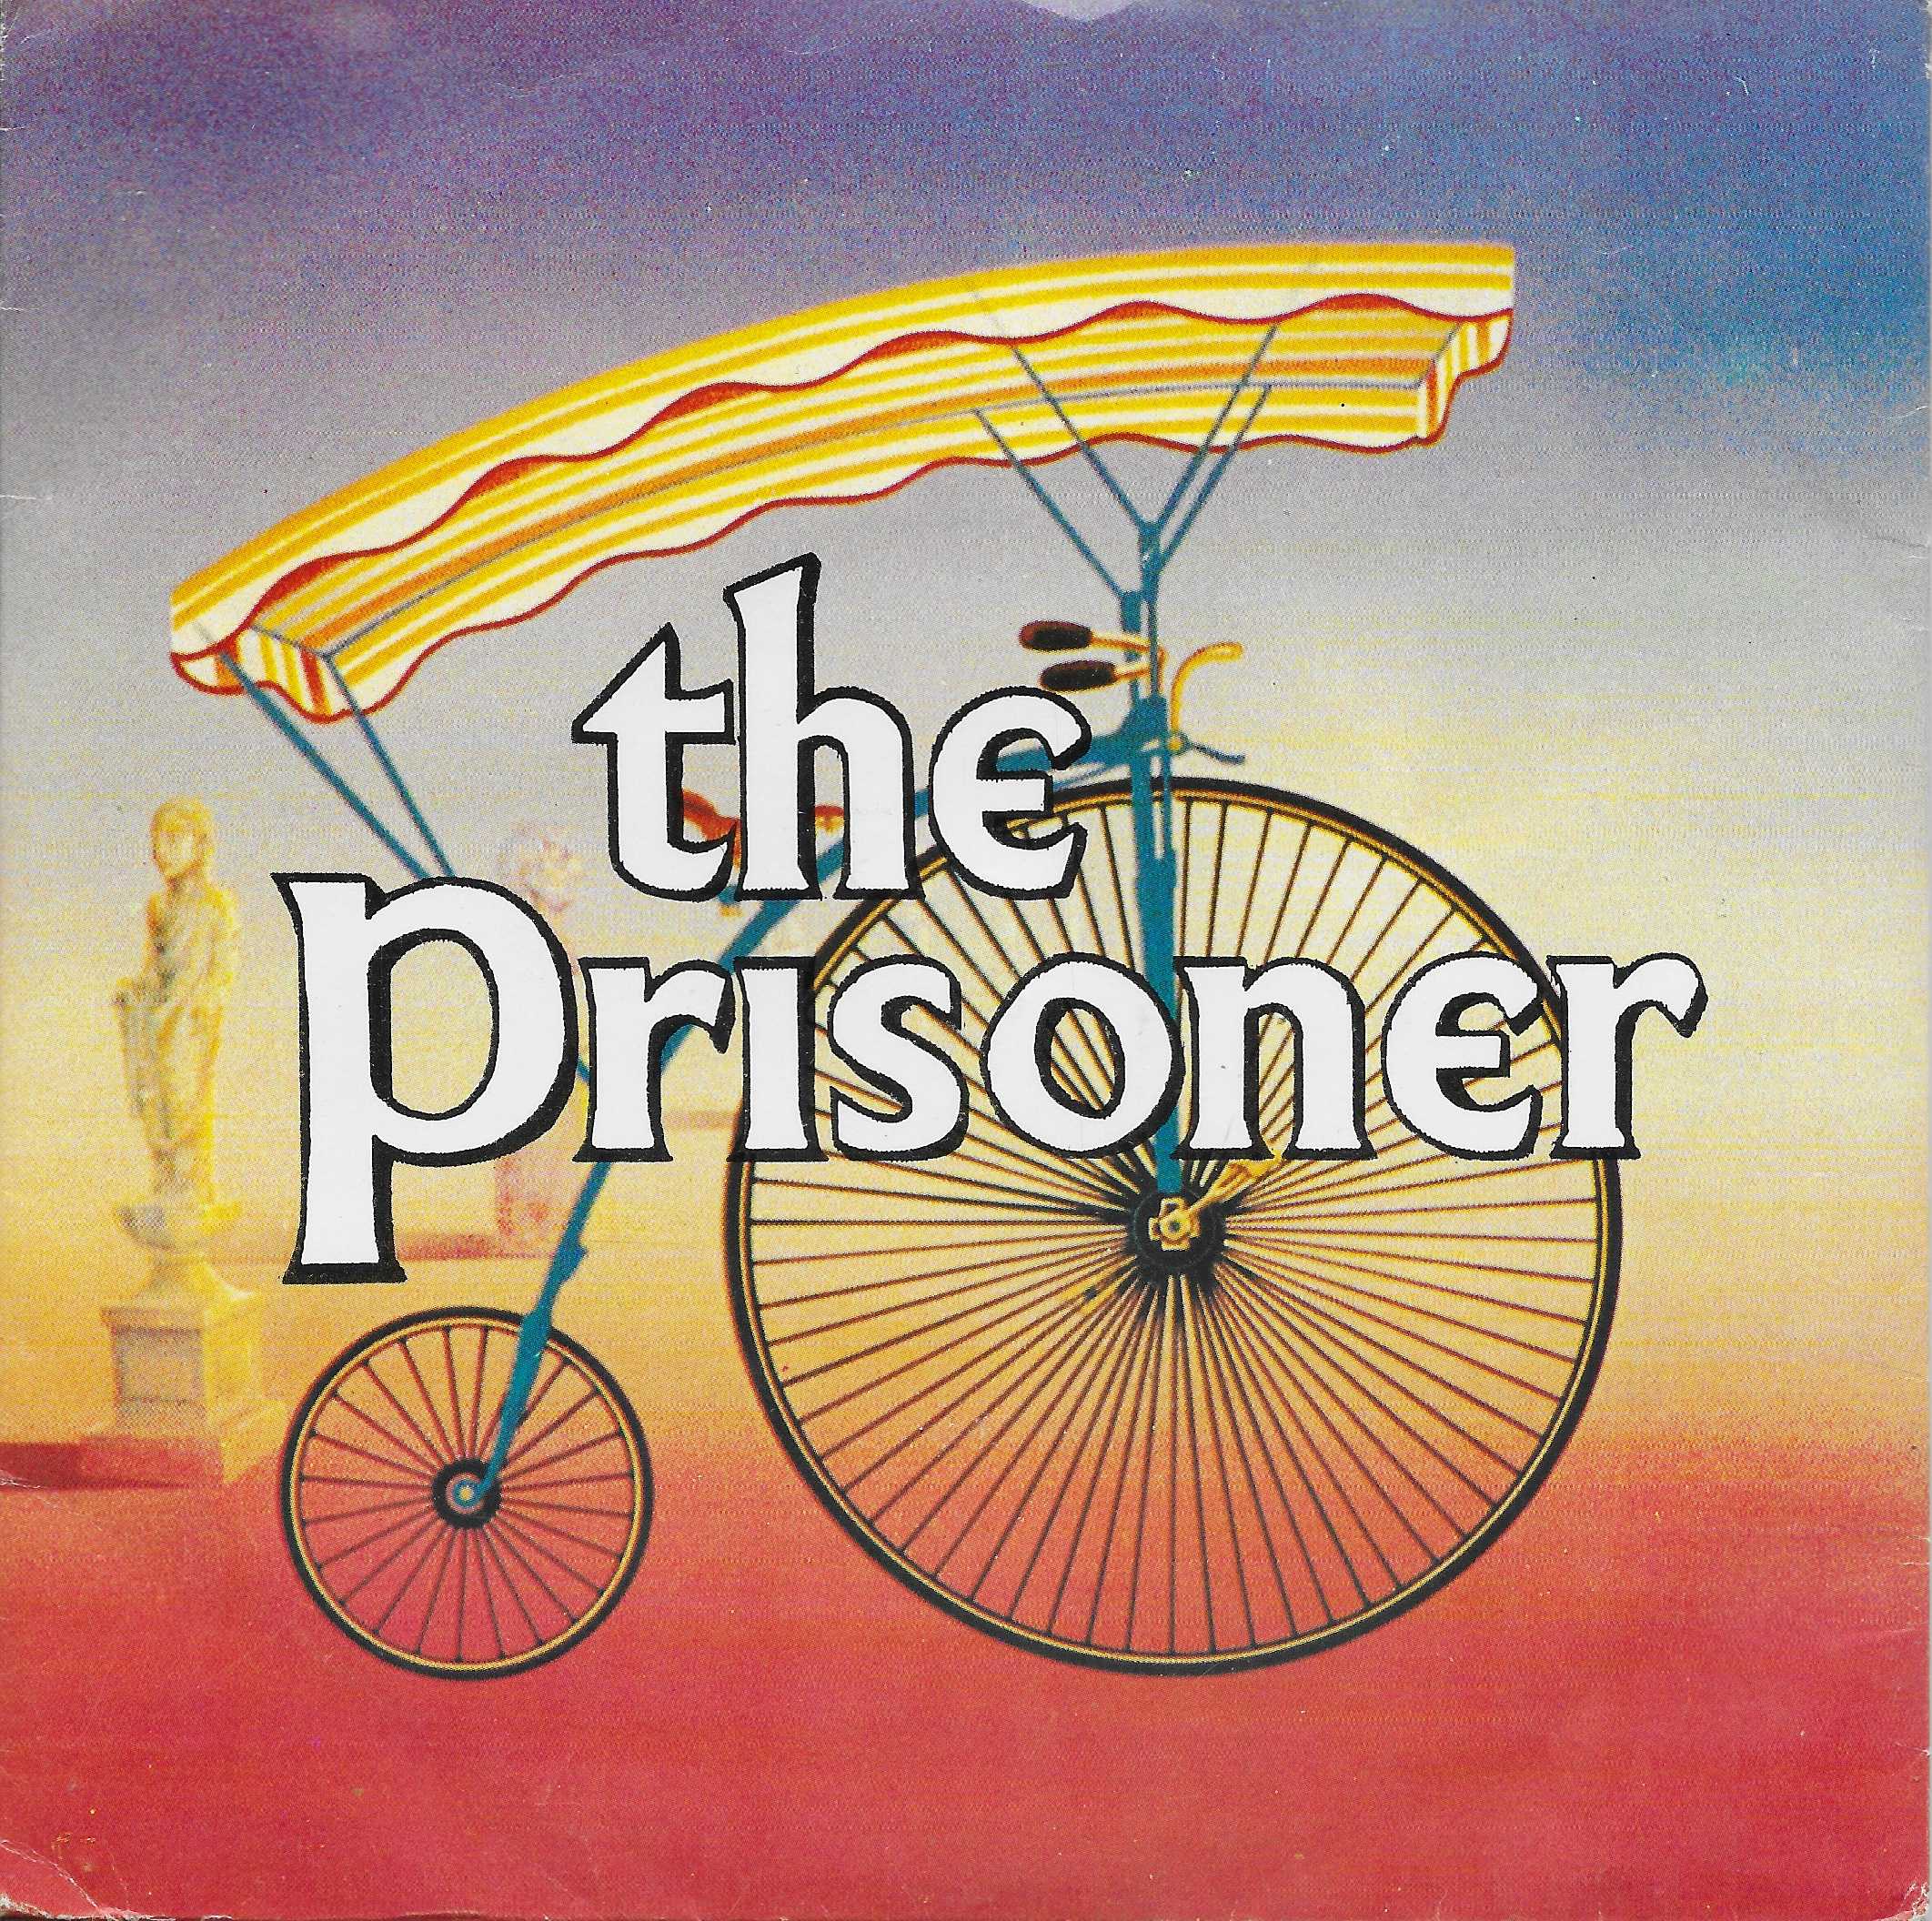 Picture of The Prisoner - Arrival by artist Ron Grainer / The Ron Grainer Orchestra from ITV, Channel 4 and Channel 5 singles library